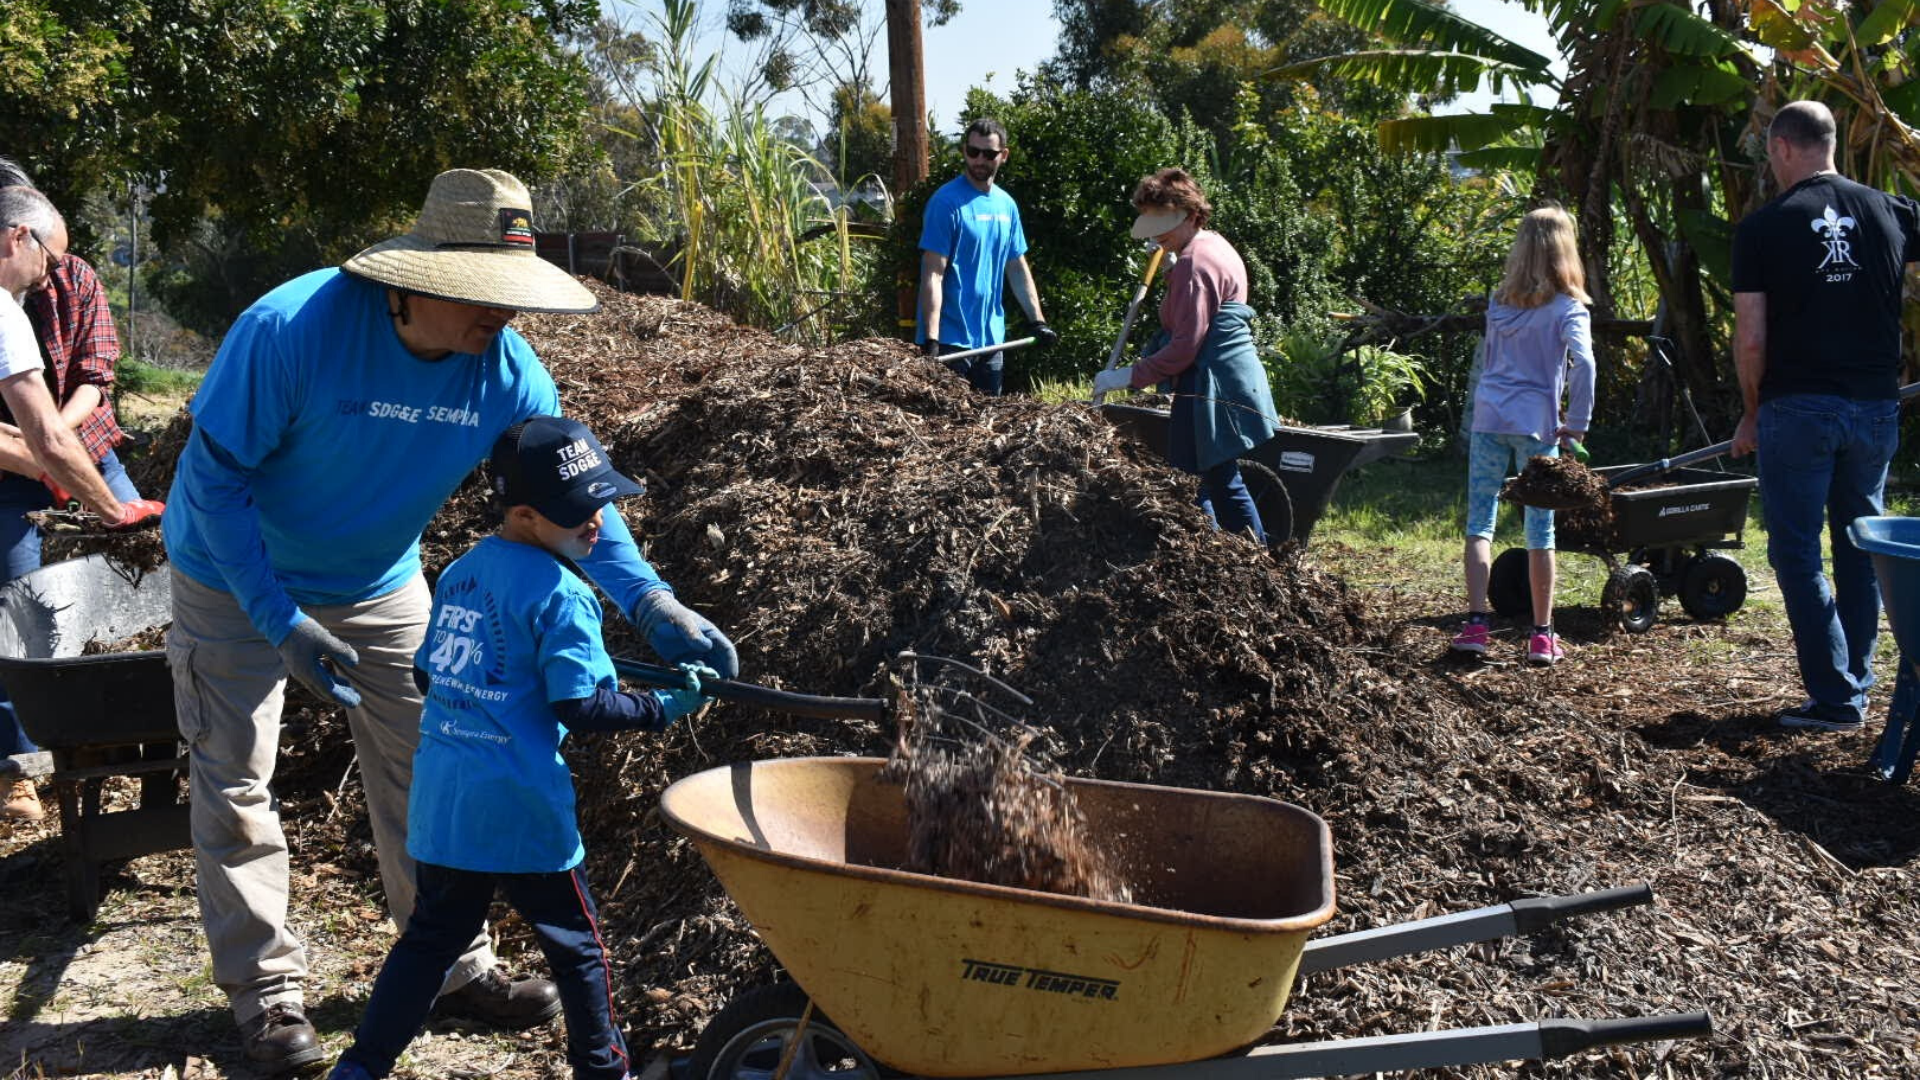 Team SDG&E volunteers work on beautification at Olivewood Gardens.